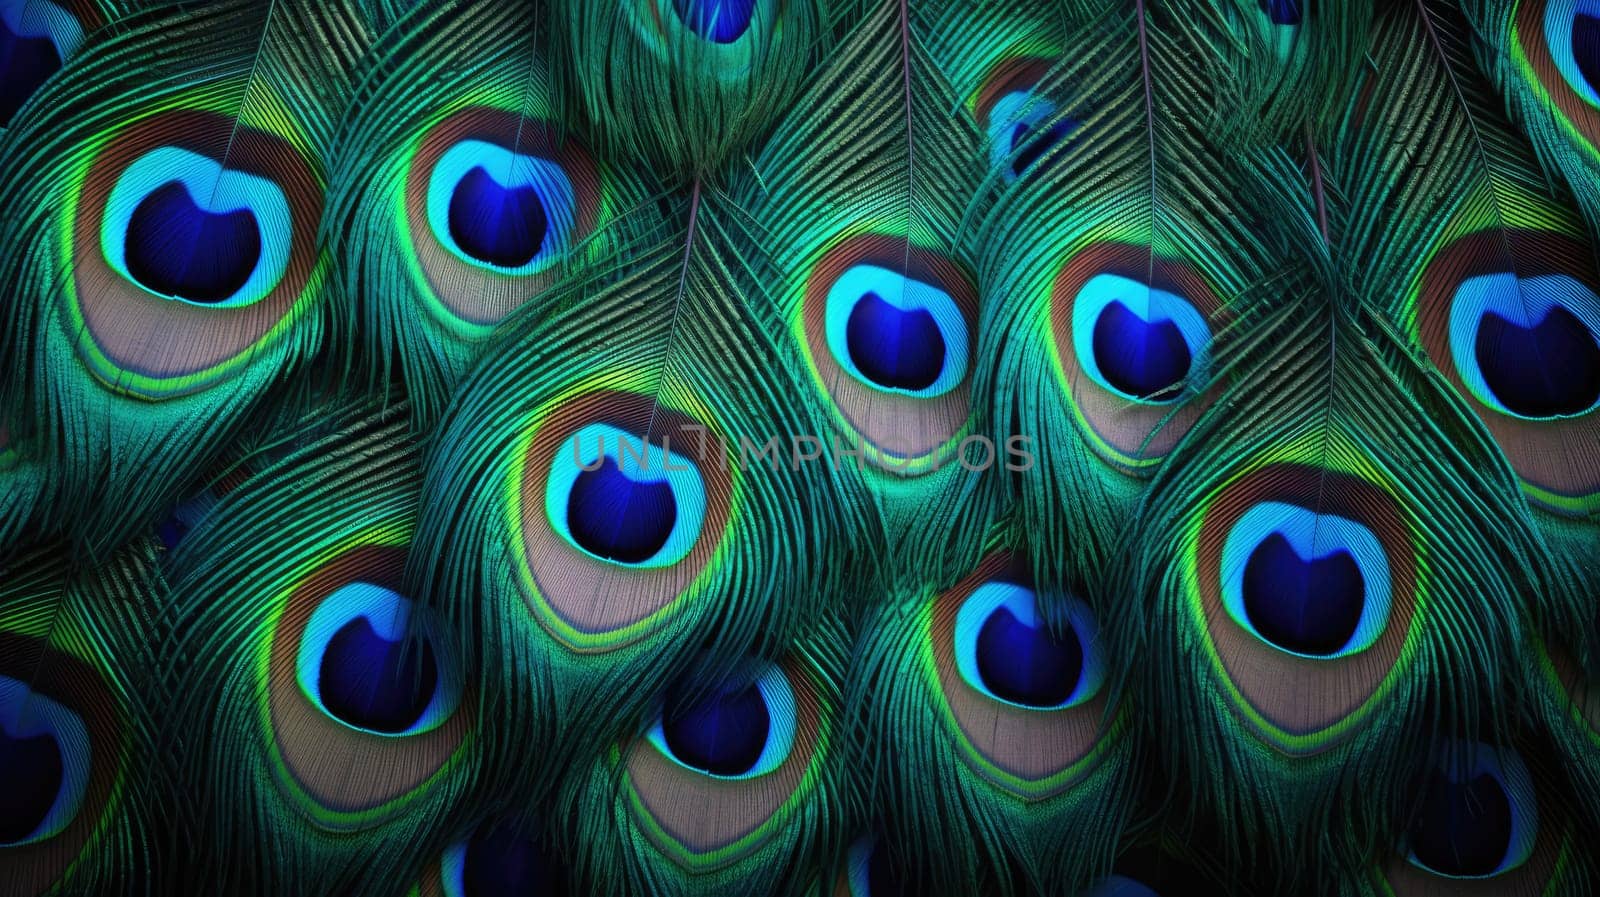 Beautiful multicolored peacock feathers, natural texture, background by natali_brill